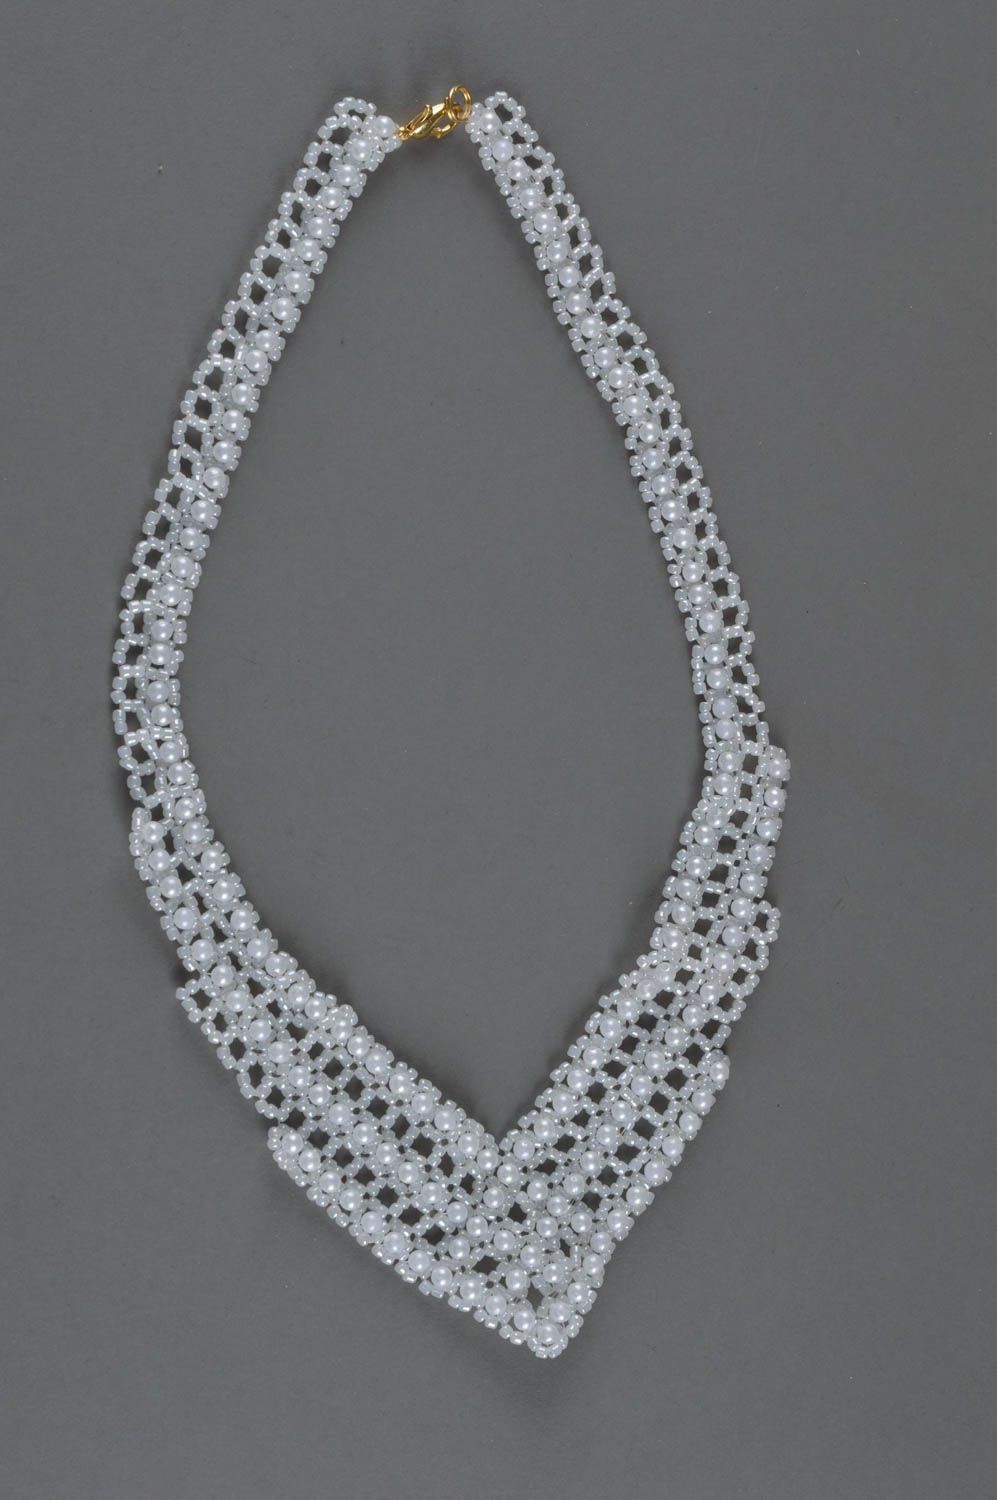 White necklace seed beads accessory handmade designer jewelry for women photo 2